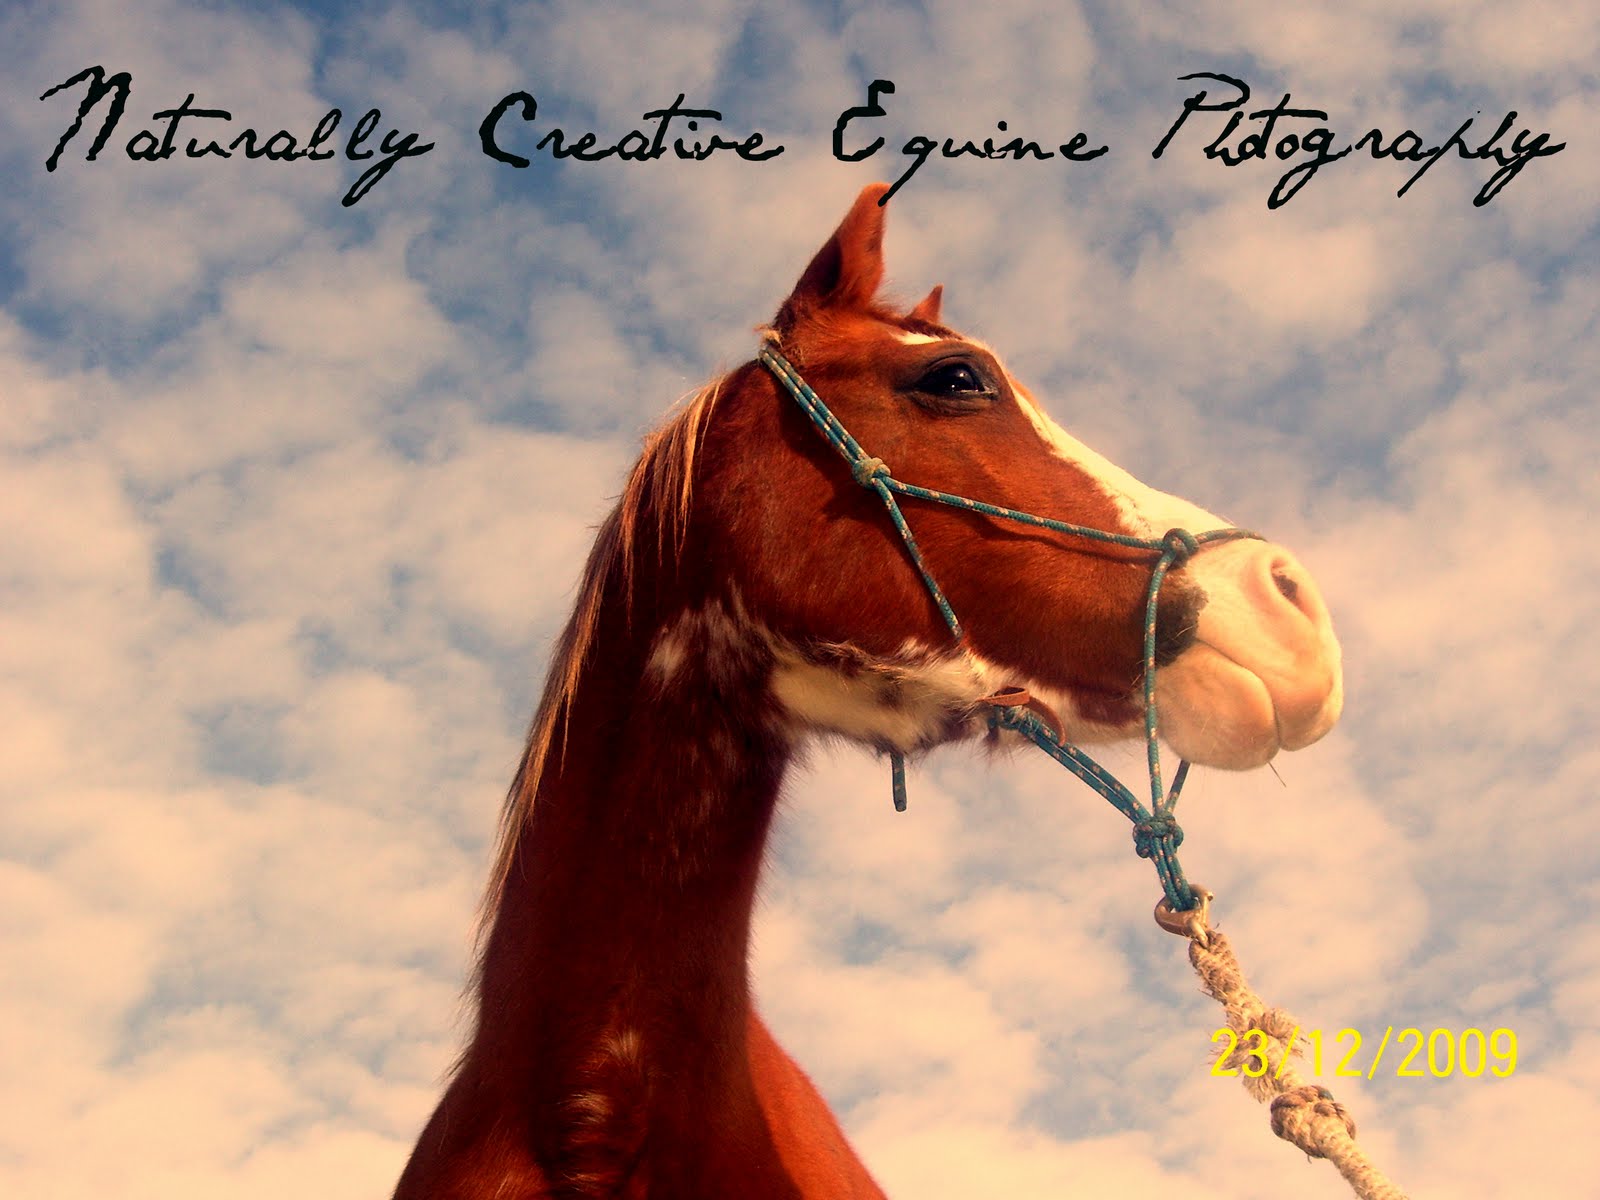 Naturally Creative Equine Photography